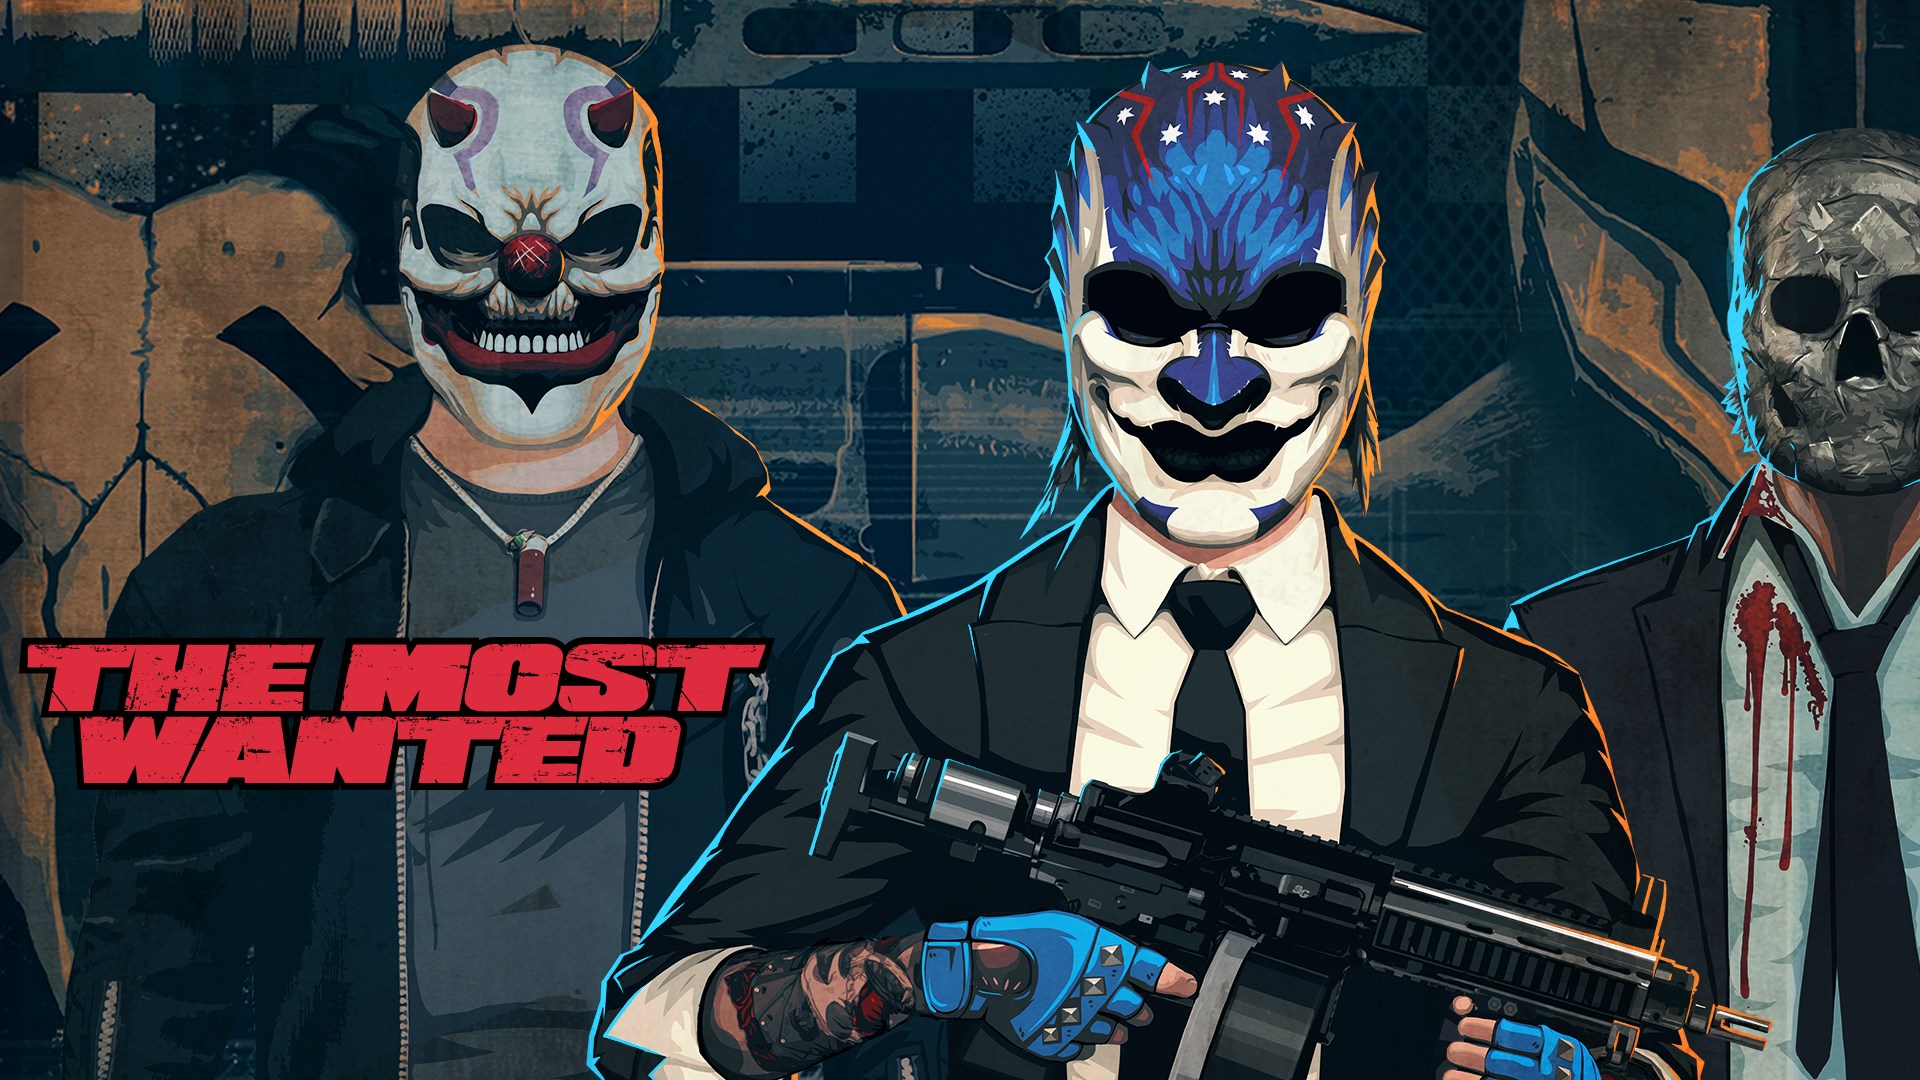 PAYDAY 2: CRIMEWAVE EDITION - The Most Wanted DLC Bundle